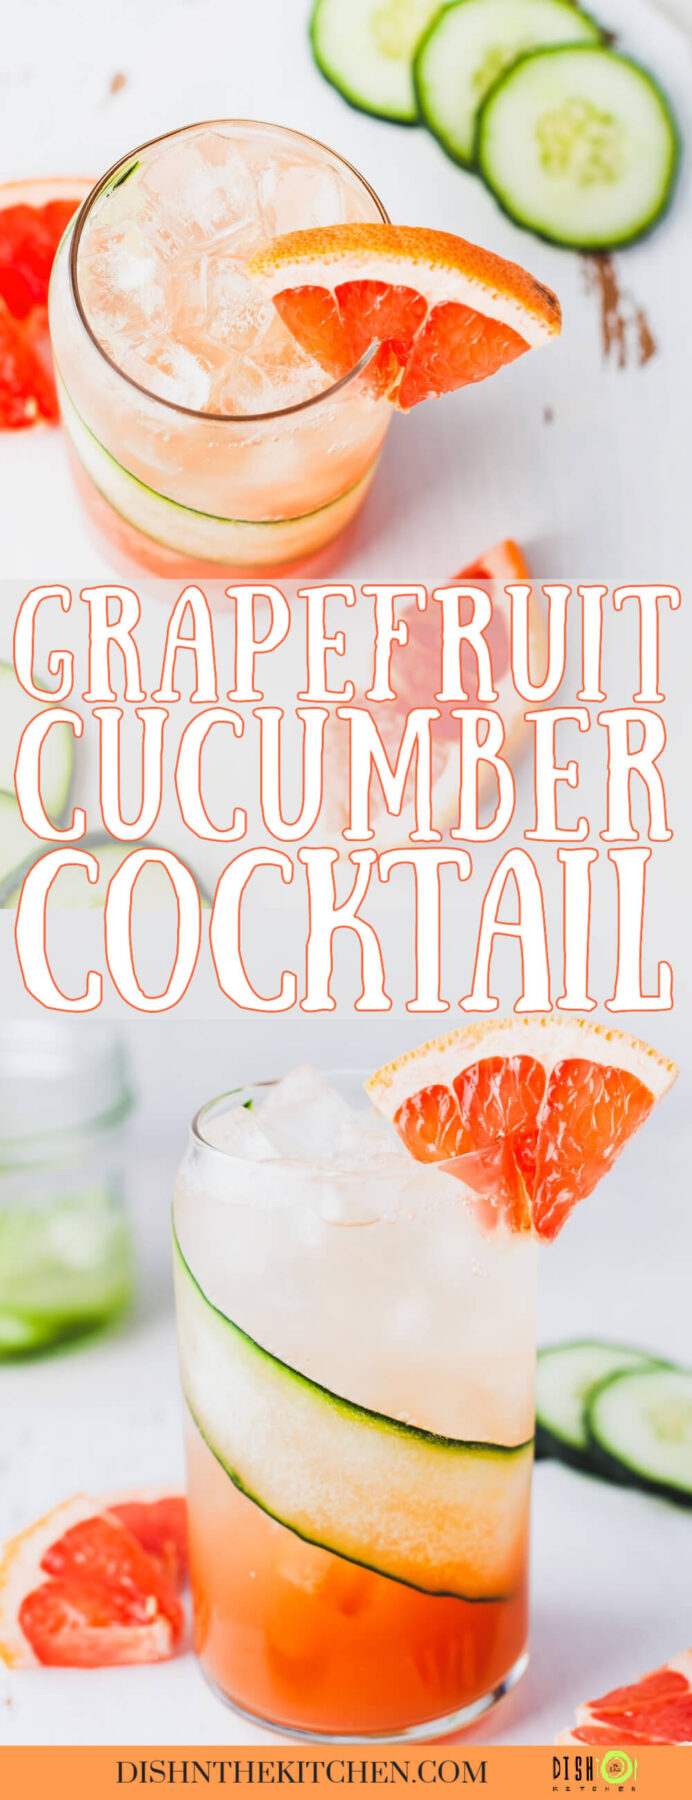 Pinterest image of a cocktail glass lined with a thin slice of cucumber and filled with ice and pink grapefruit cocktail with a small wedge of grapefruit as a garnish.